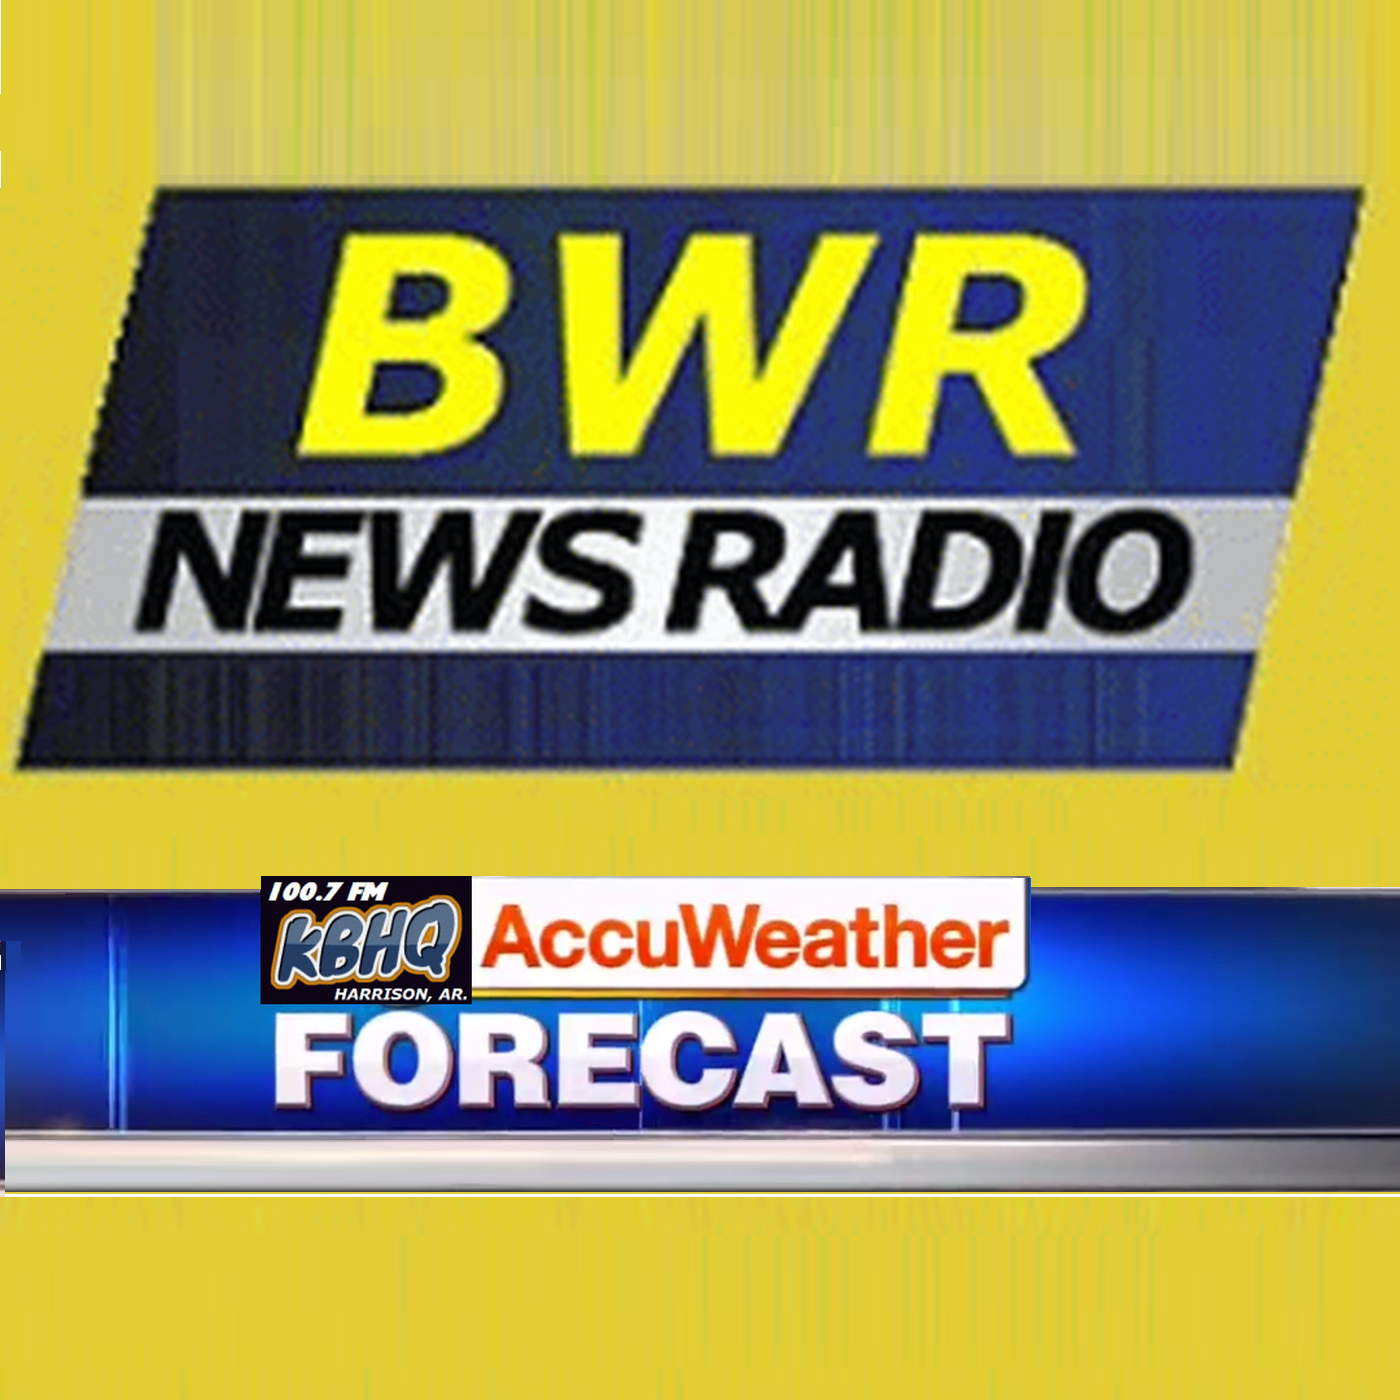 Art for LOCAL FORECAST by BWR Newsradio